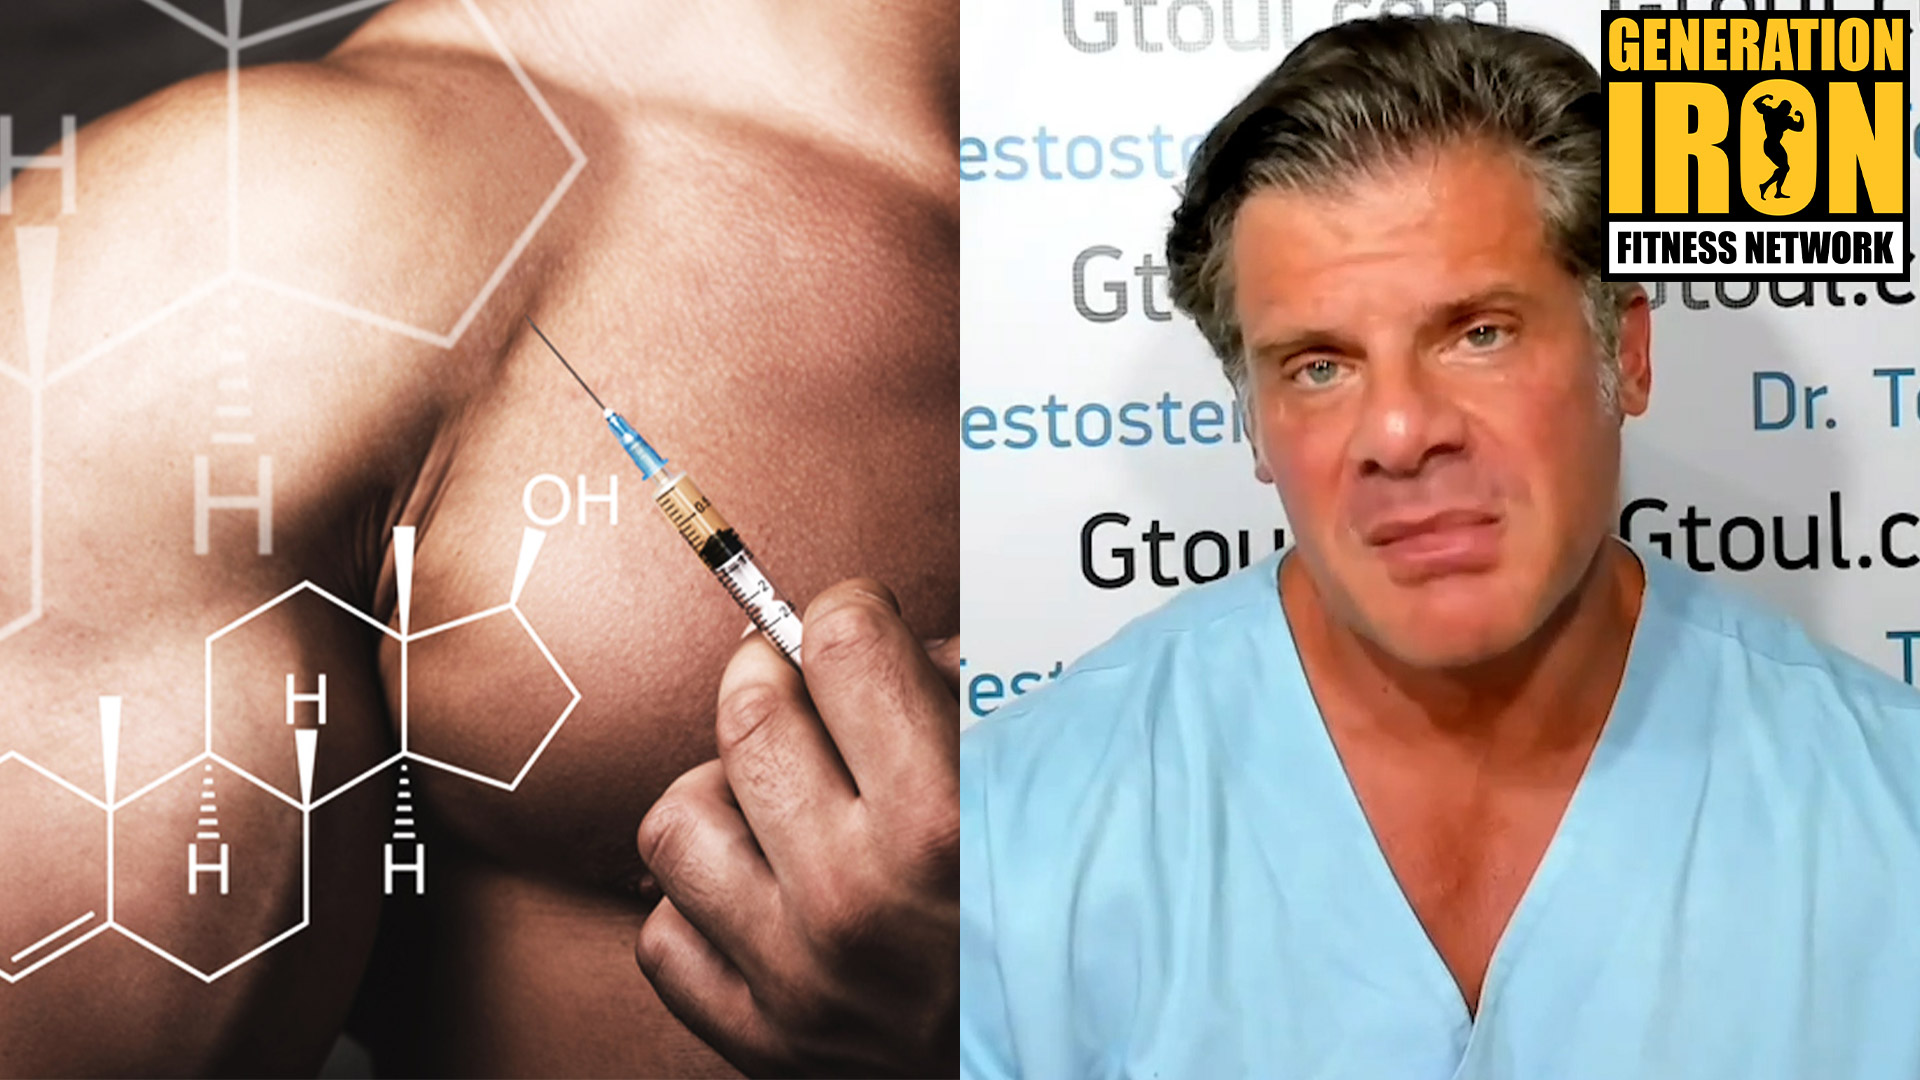 Dr. Testosterone: Young Steroid Users Will Have Low Natural Testosterone By Mid 30s